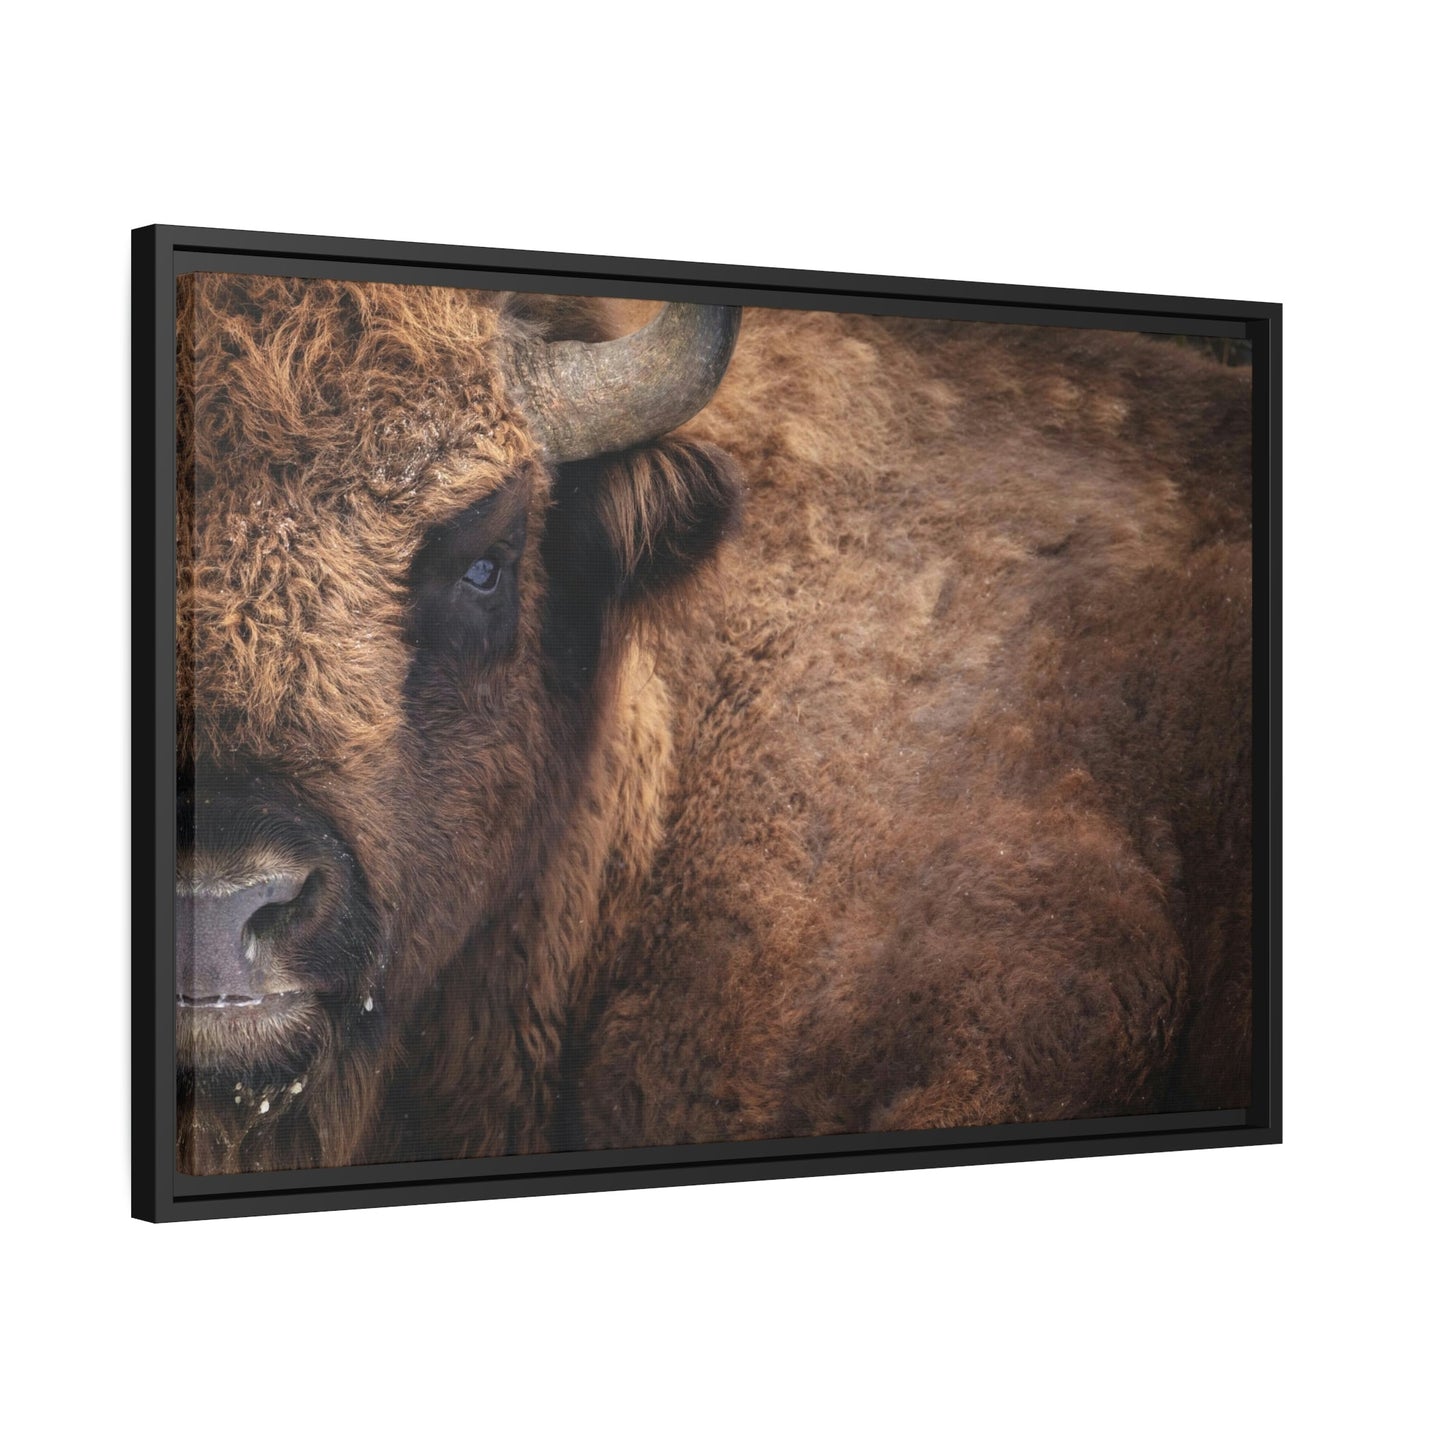 Artistic Bull Illustration: Natural Canvas and Poster Prints